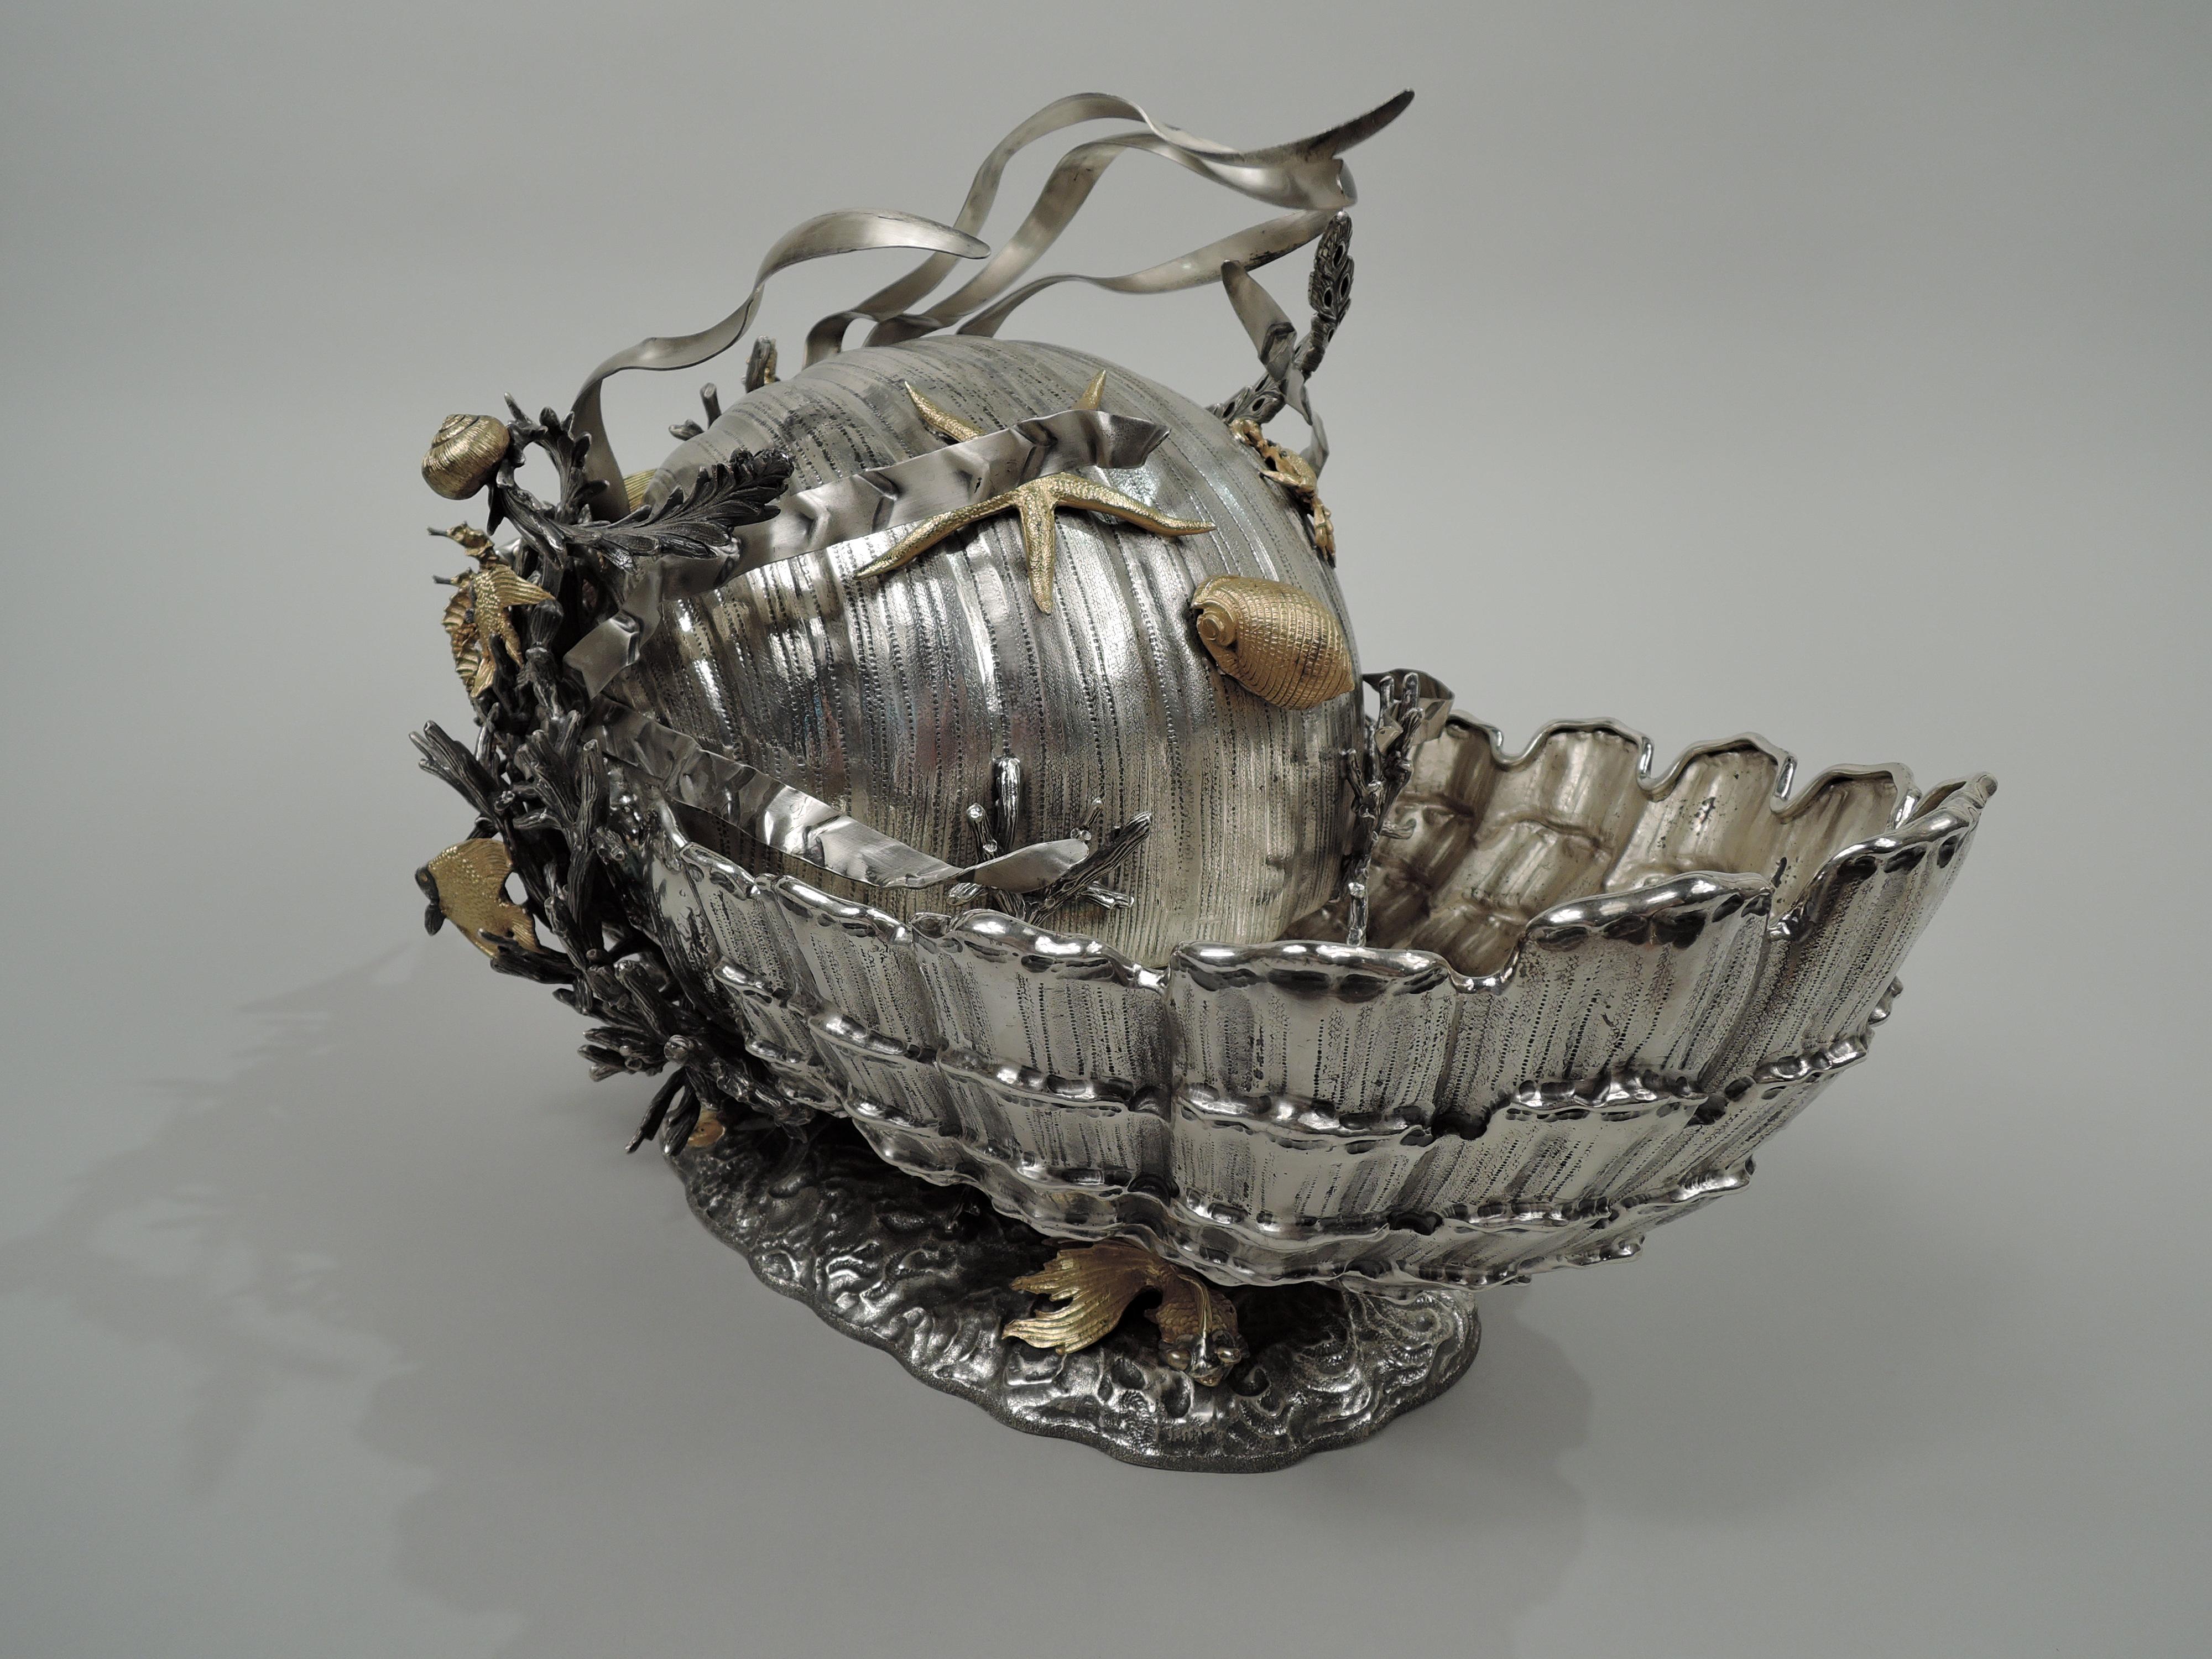 Italian Modern fantasy marine silver centerpiece. Ovoid shell with second hemispheric shell set in back on ovoid seabed base. Naturalistic irregularities, striation, and accretions as well as a thriving crustacean community with crabs, snails, and